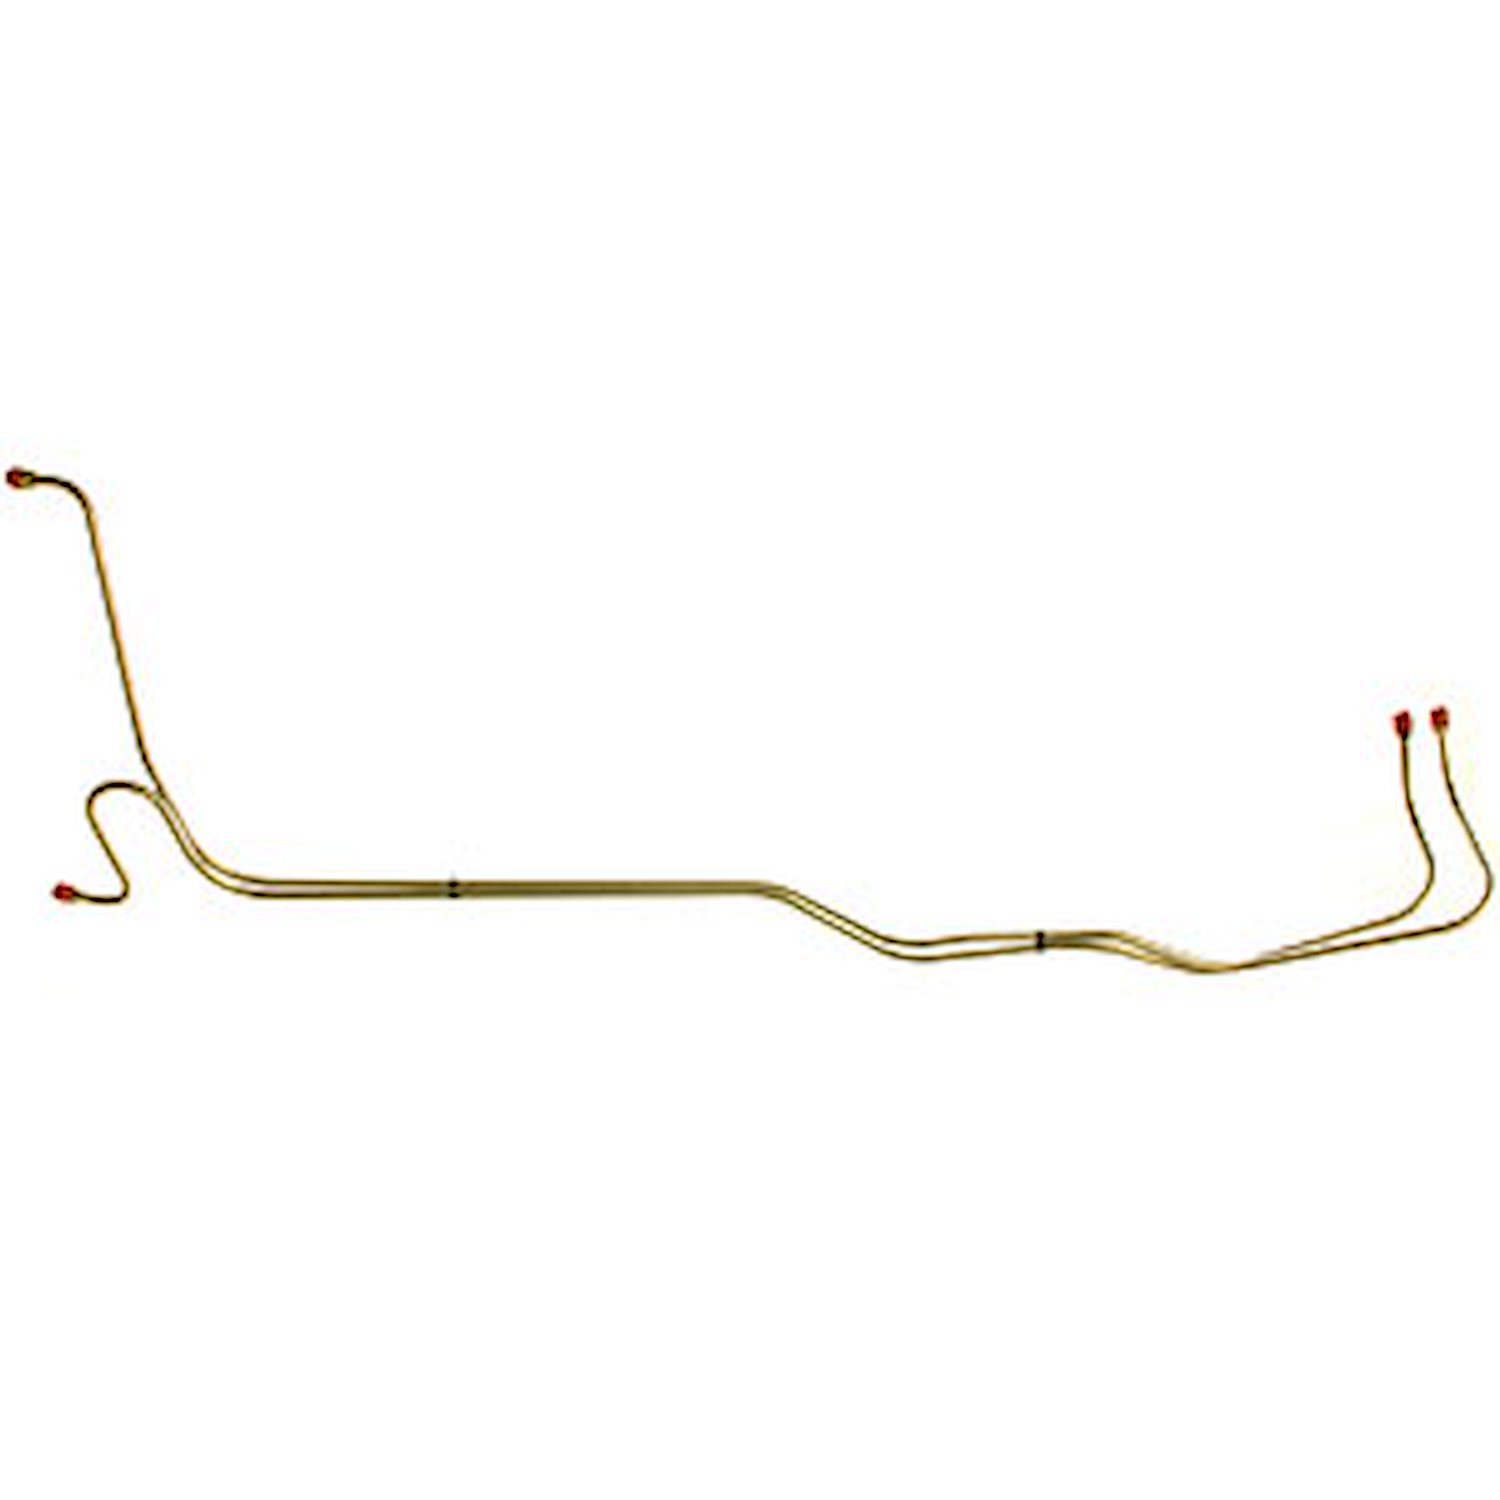 66 Chevy 12IN. Span Loop in Pass. Side - Trans. Cooling Lines 2 Pcs. Stainless